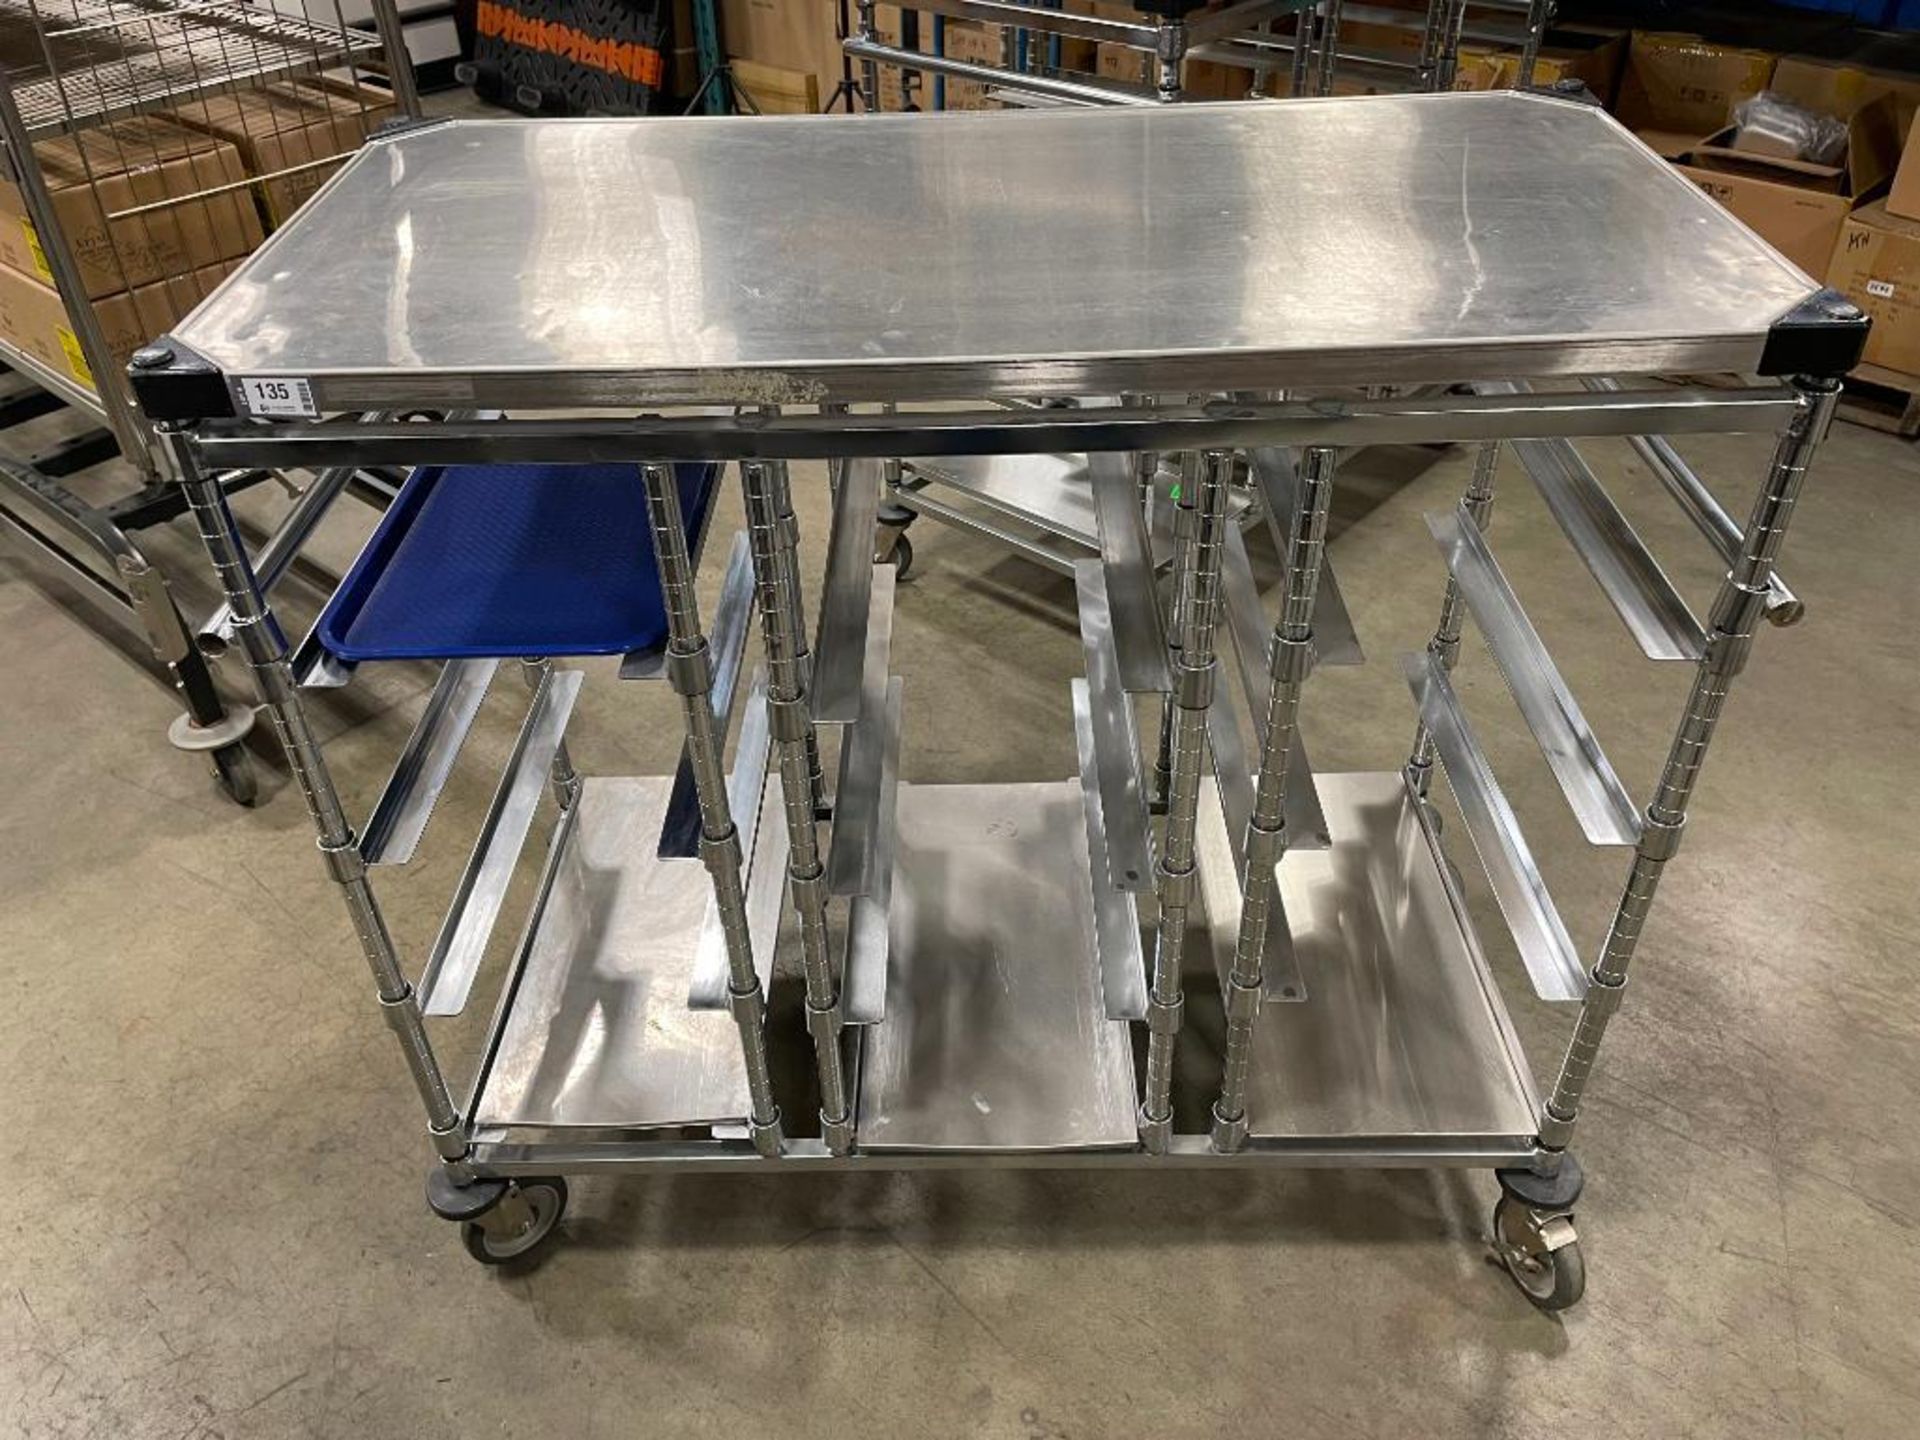 47" X 24" STAINLESS STEEL CART WITH 9-SLOT PAN HOLDER - Image 2 of 7